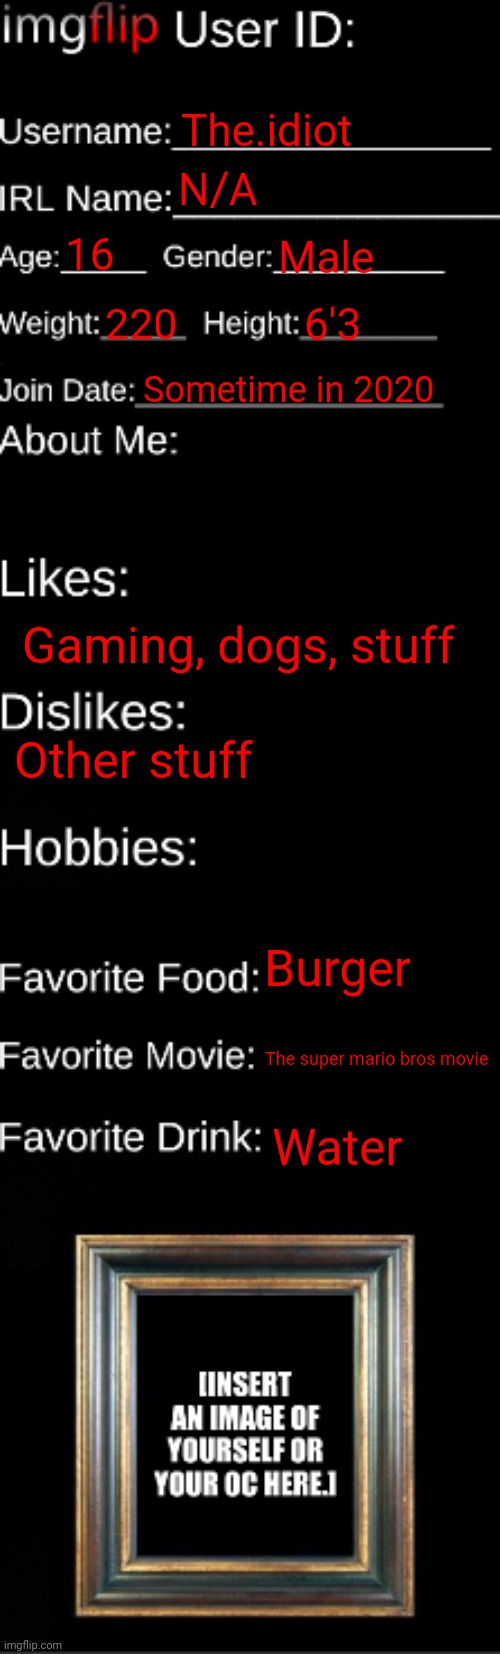 imgflip ID Card | The.idiot; N/A; 16; Male; 220; 6'3; Sometime in 2020; Gaming, dogs, stuff; Other stuff; Burger; The super mario bros movie; Water | image tagged in imgflip id card | made w/ Imgflip meme maker